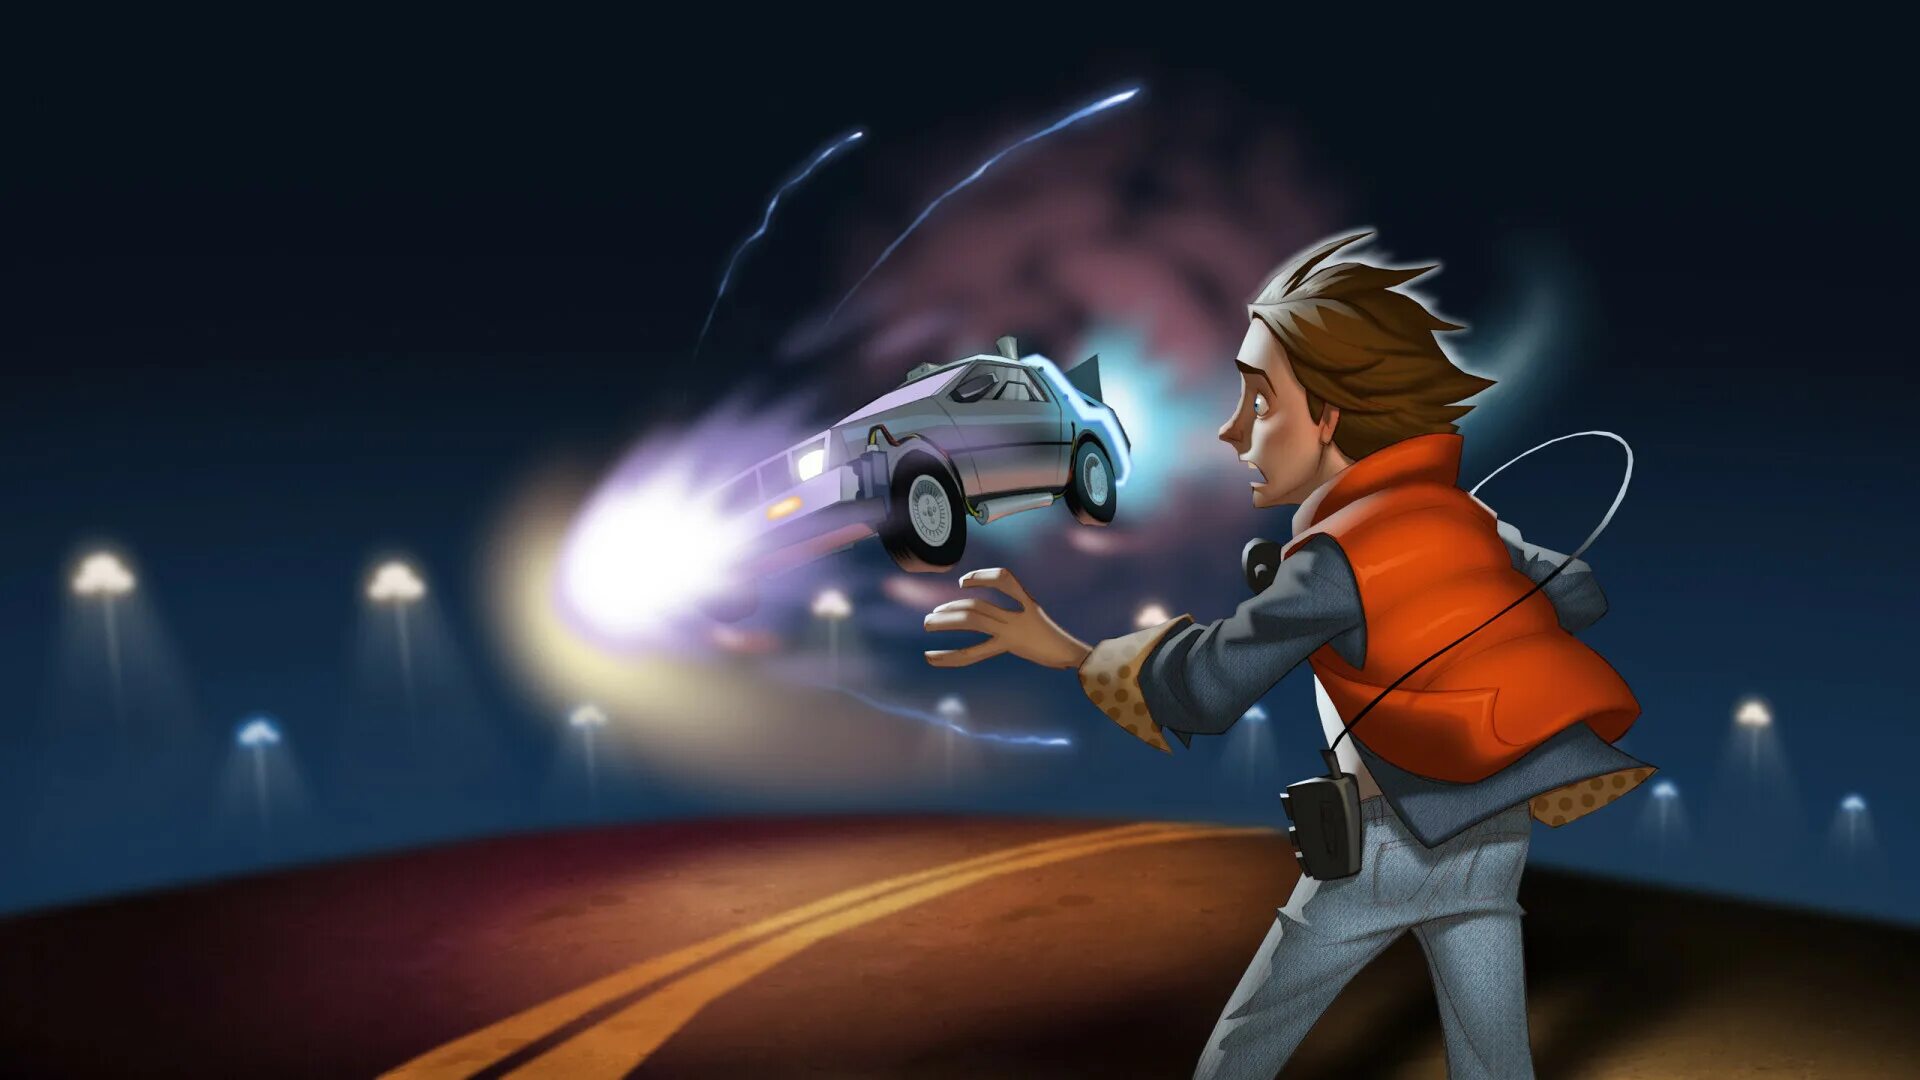 Back to the Future (игра, 1985). Back to the Future the game назад в будущее. Back to the Future 2 игра. Назад в будущее игра эпизод 1. Back to experiences